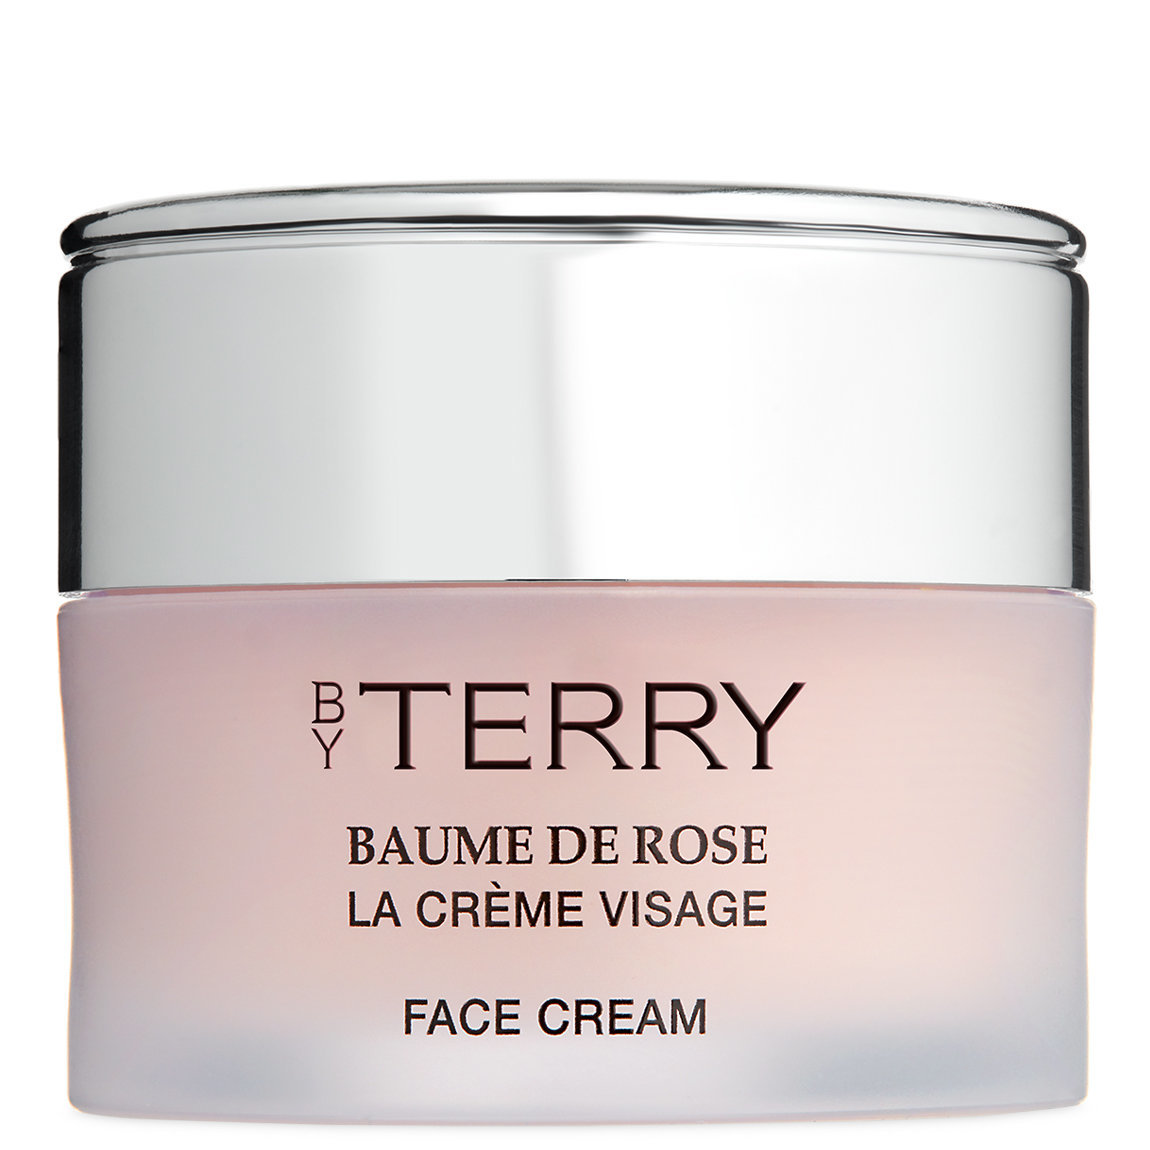 BY TERRY Baume de Rose Face Cream alternative view 1 - product swatch.